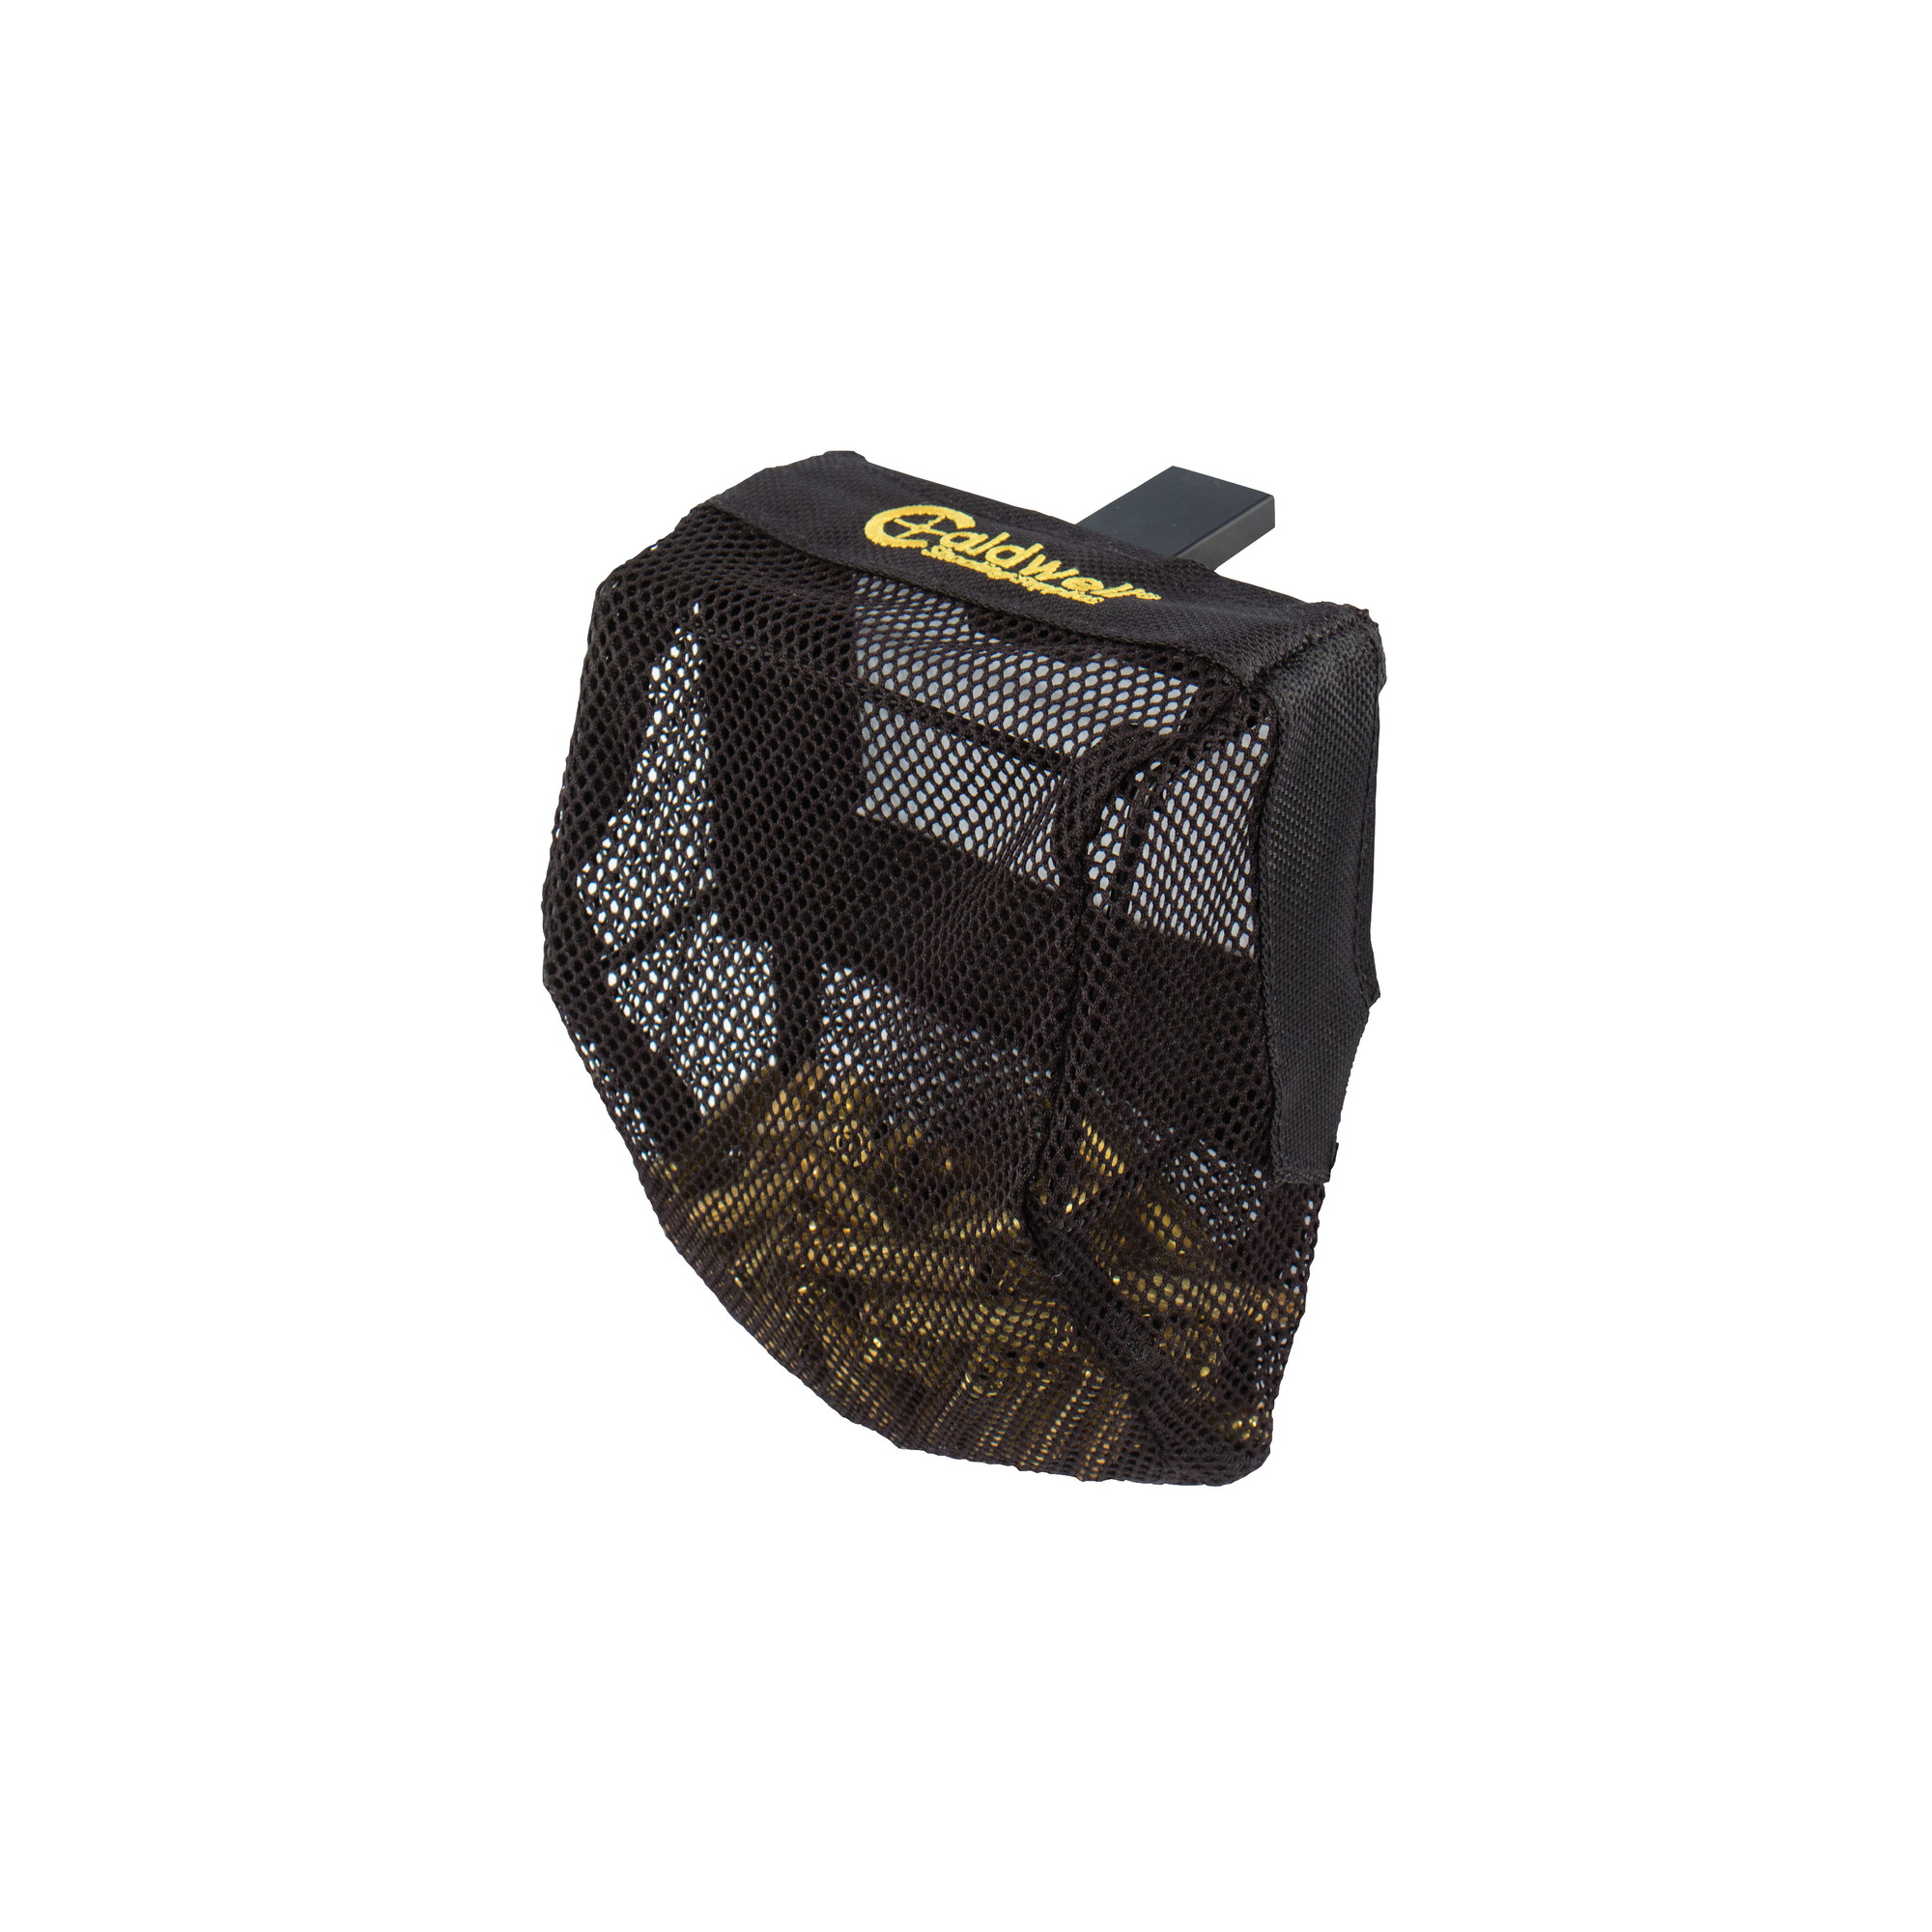 GLORYFIRE Pic Rail Brass Catcher with Heat Resistant Mesh and Zippered Bottom for Picatinny Mountable Quick Unload 